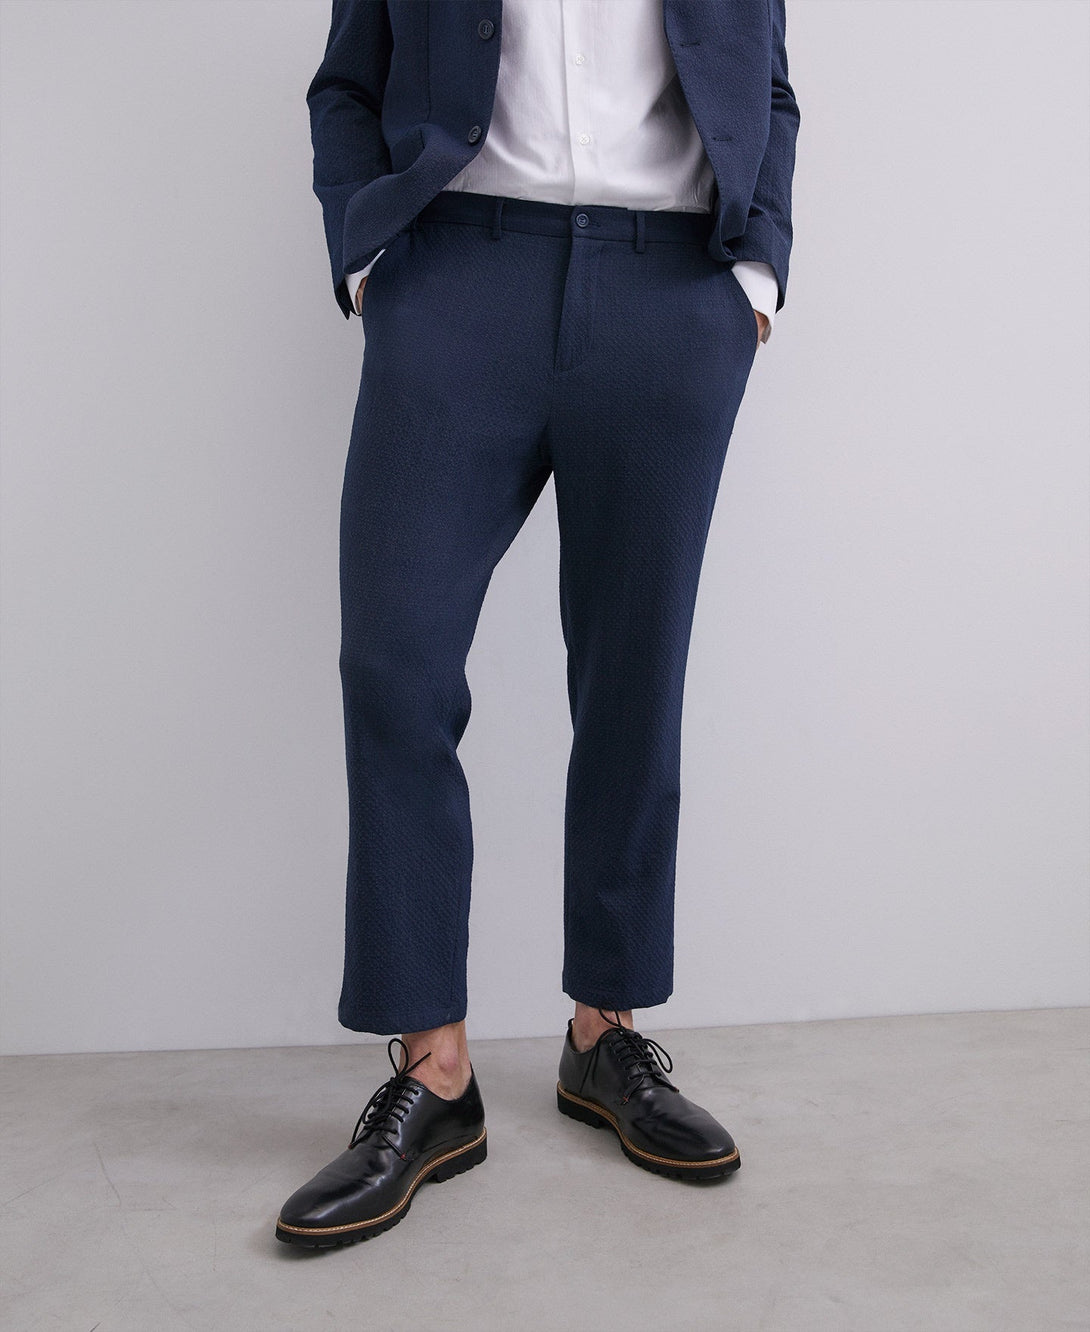 Men Trousers | Navy Blue Navy Blue Straight Trousers by Spanish designer Adolfo Dominguez